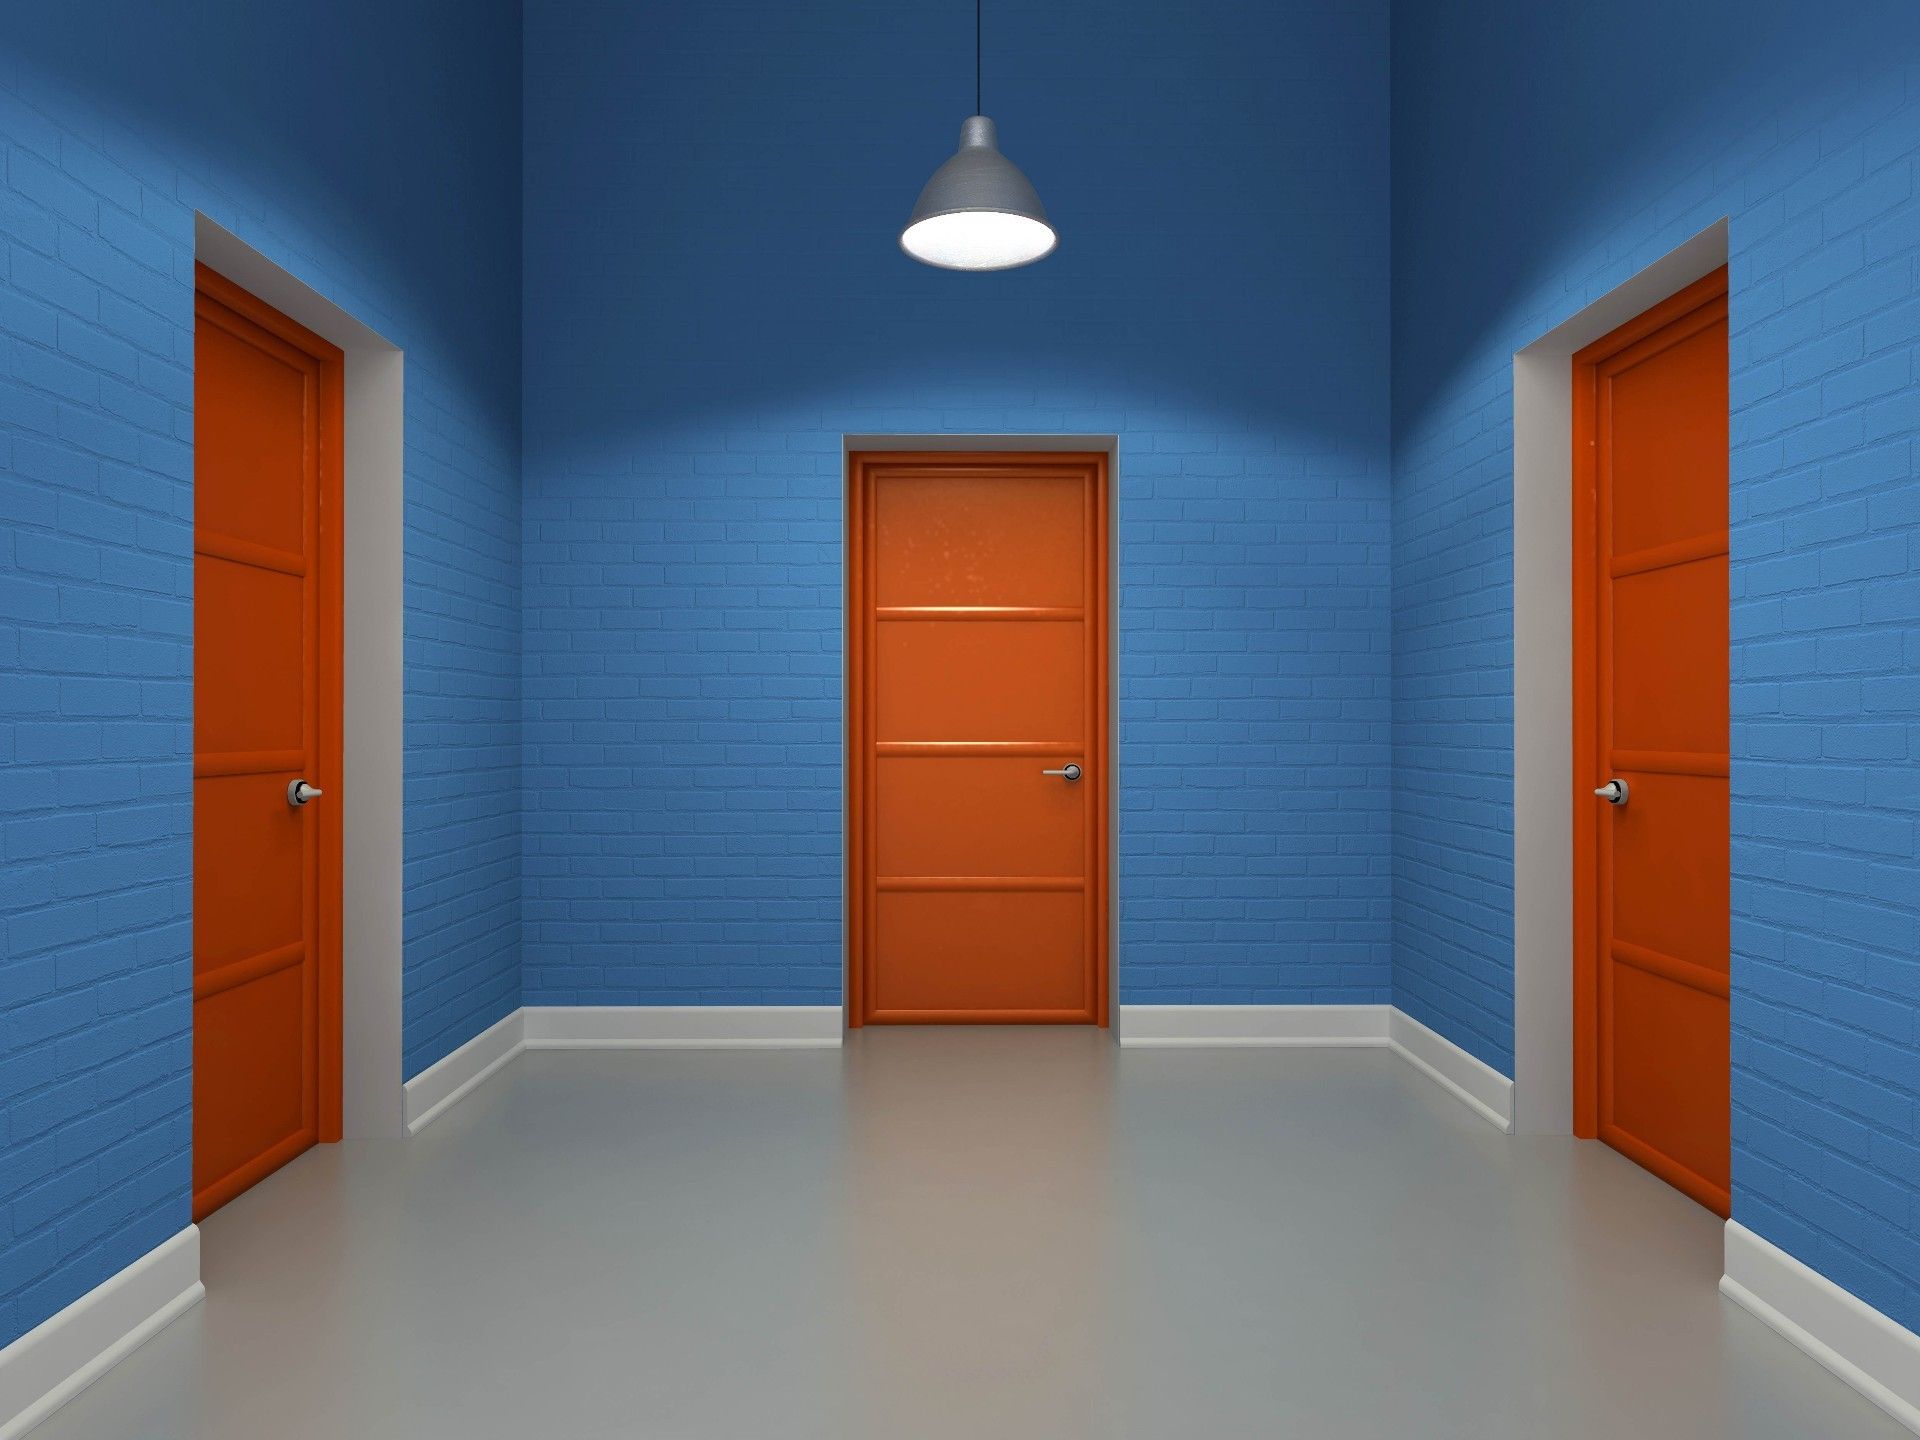 Three Doors In An Empty Room Background Full HD